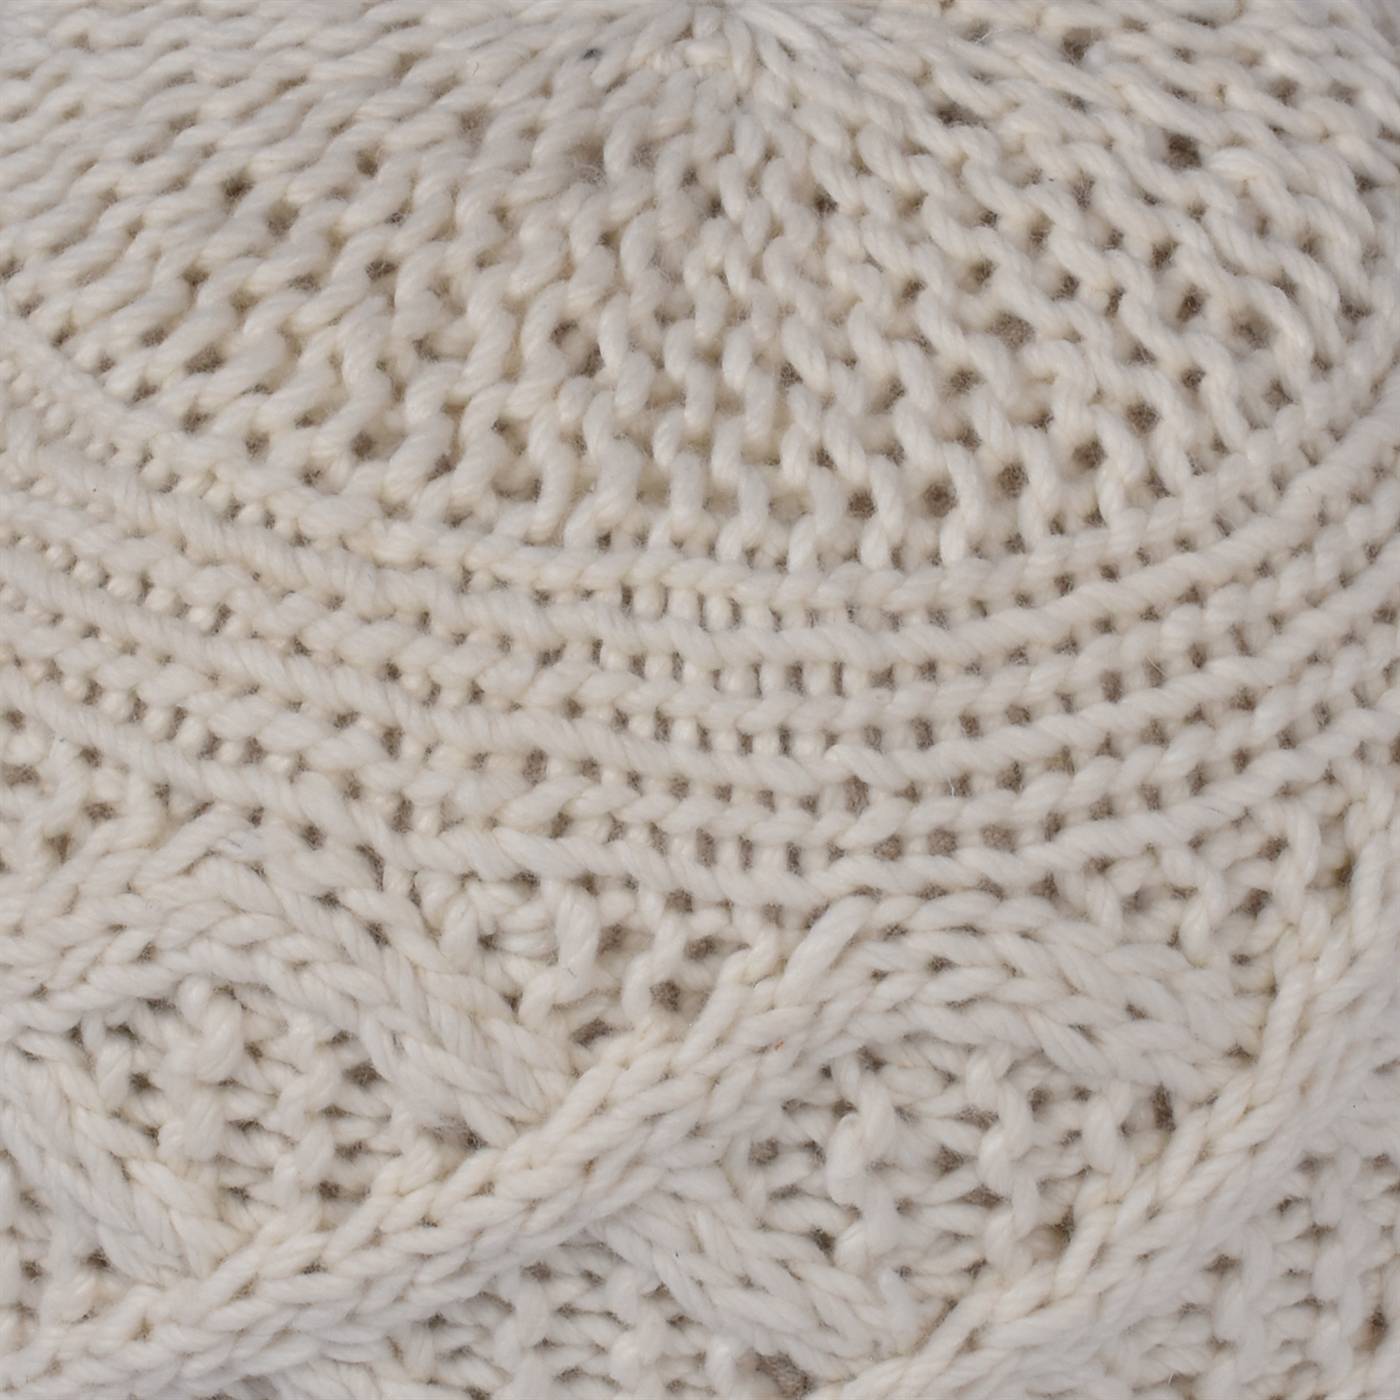 Kirwee Pouf, 50x50x35 cm, Natural White, NZ Wool, Hand Knitted, Hm Knitted, Flat Weave